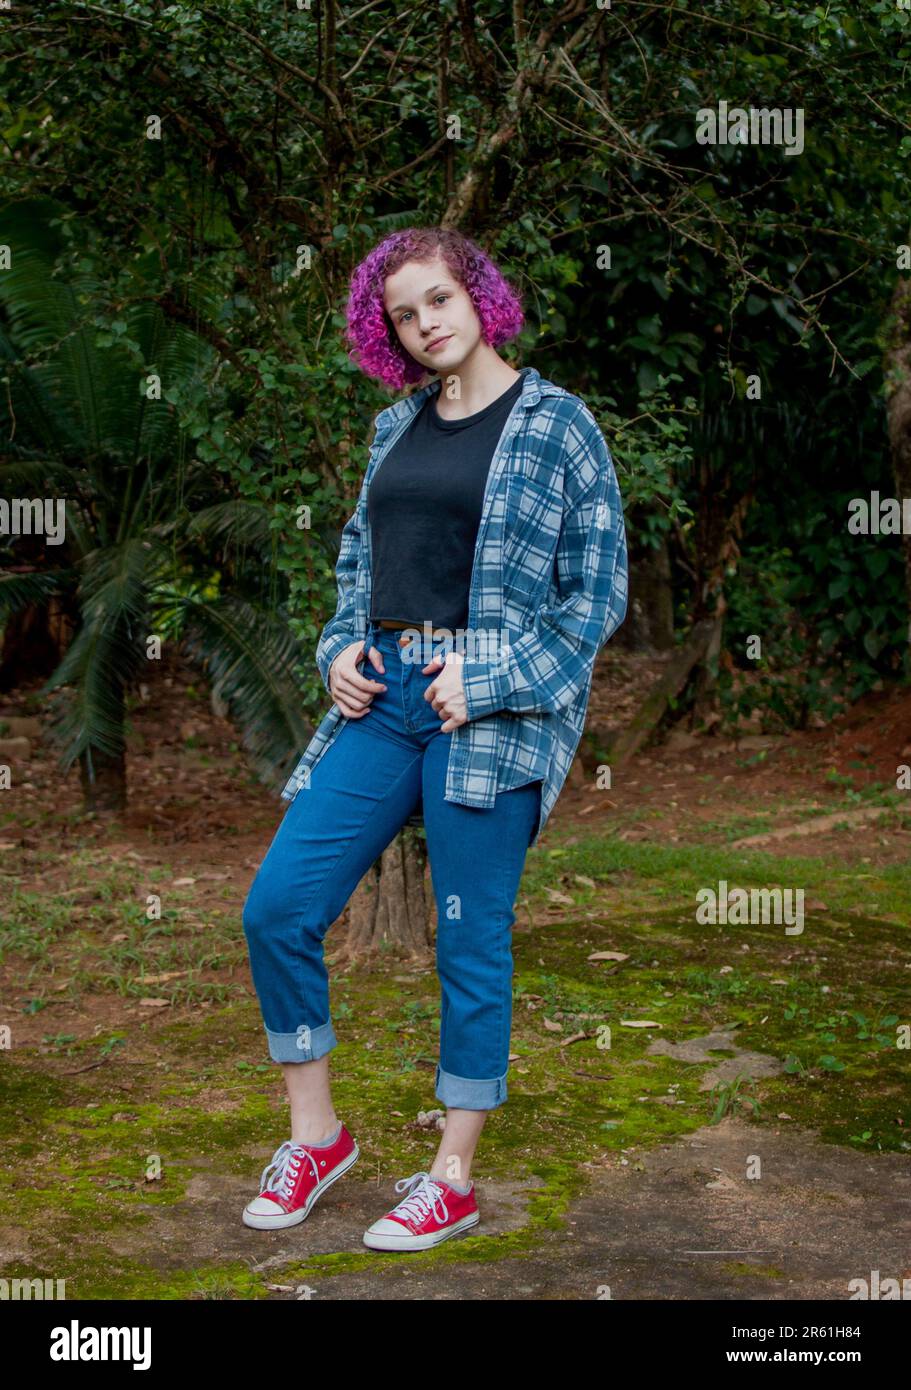 Young woman with colored hair outdoors Stock Photo